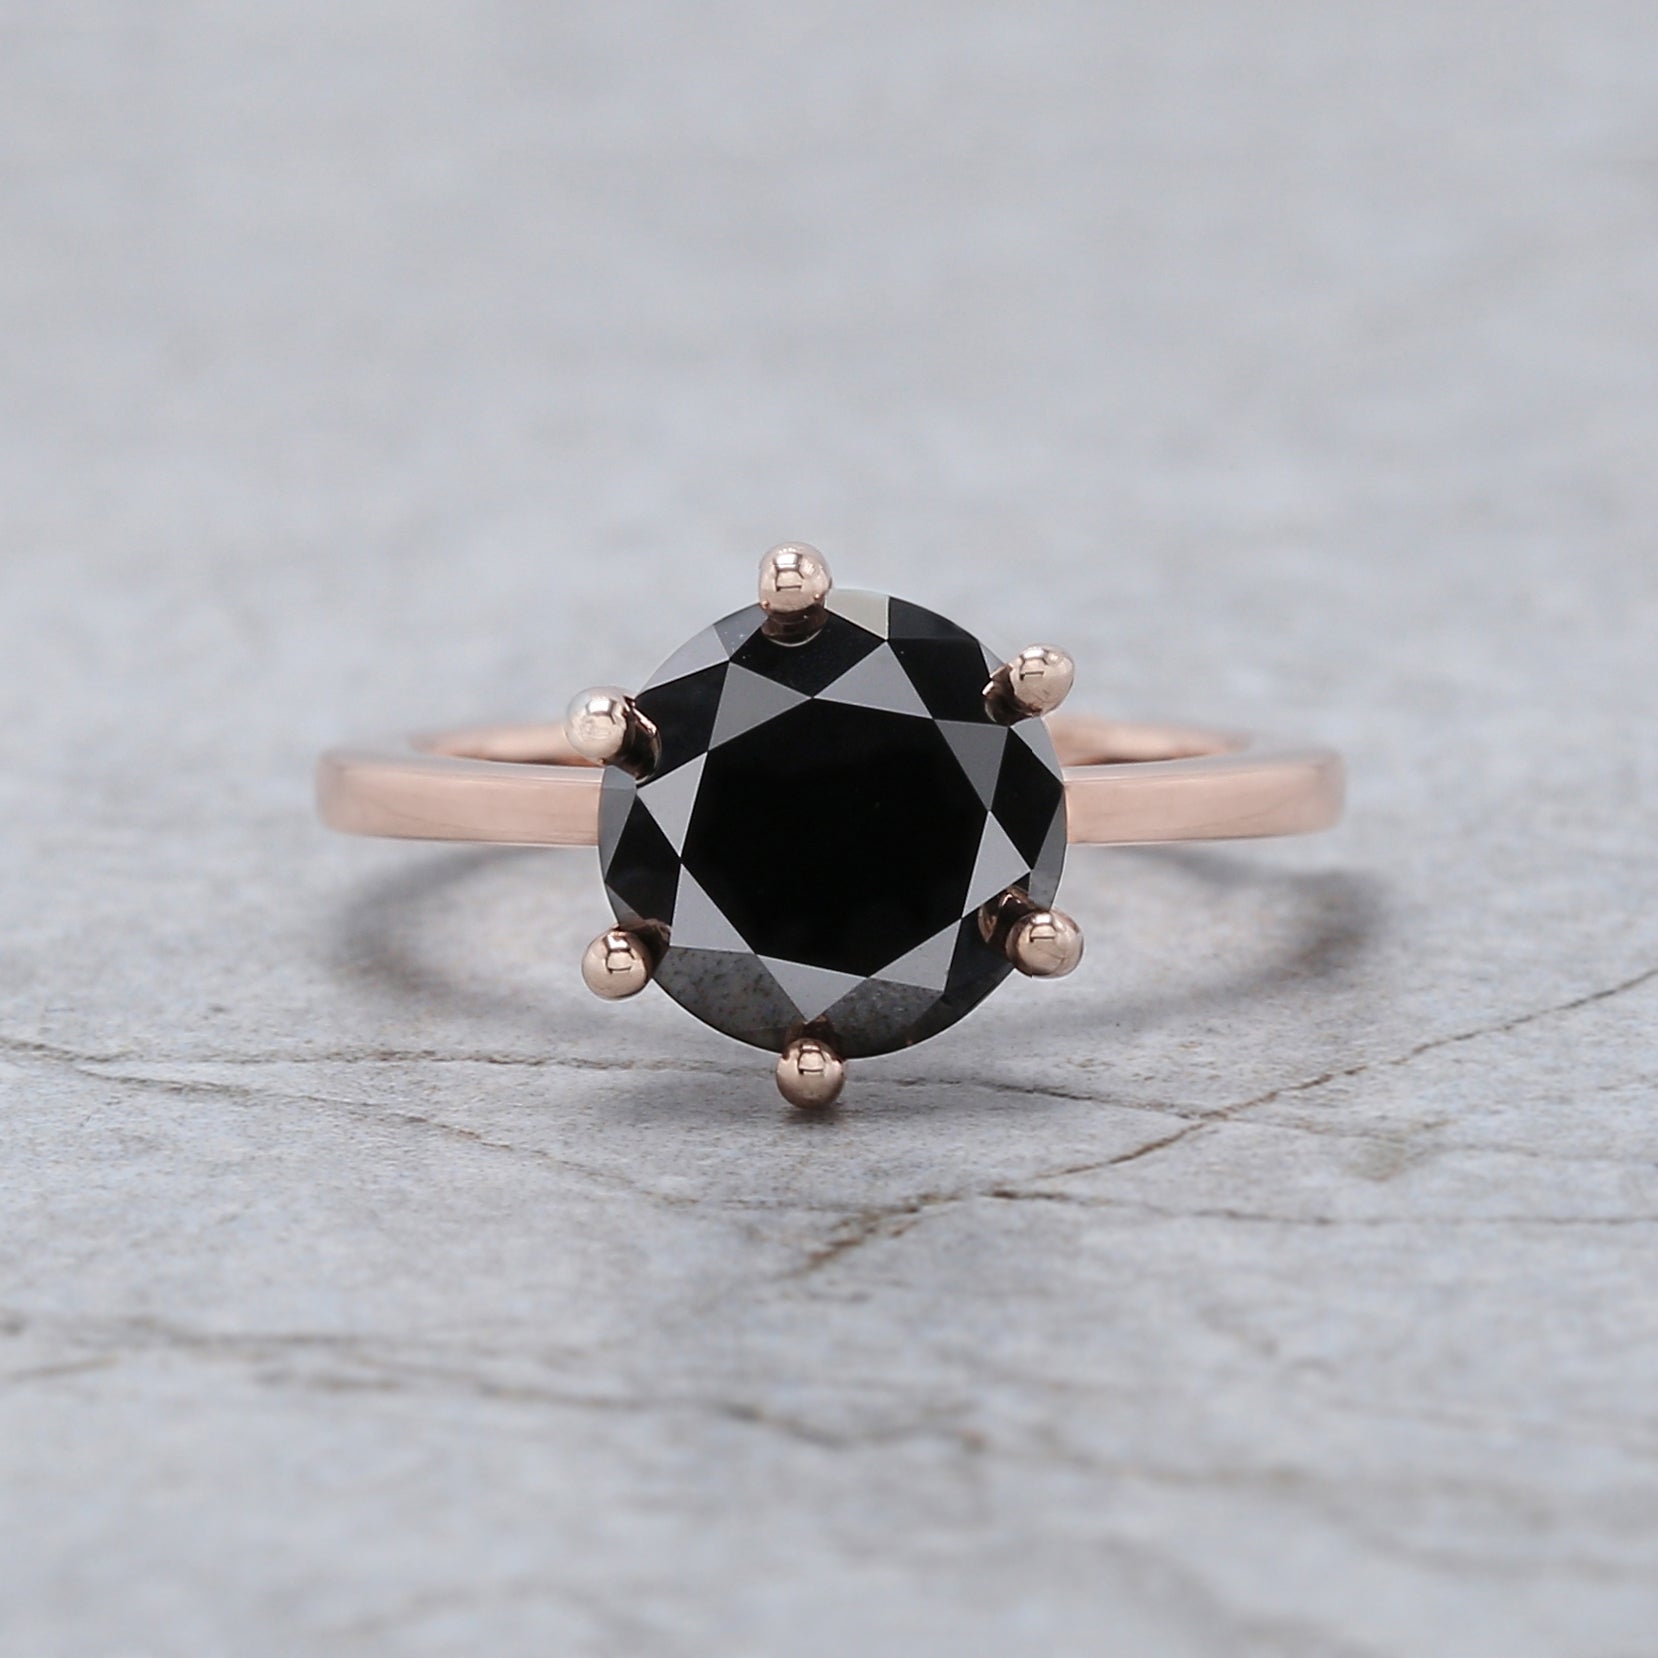 Round Cut Black Color Diamond Ring 2.65 Ct 8.55 MM Round Shape Diamond Ring 14K Solid Rose Gold Silver Engagement Ring Gift For Her QL9631